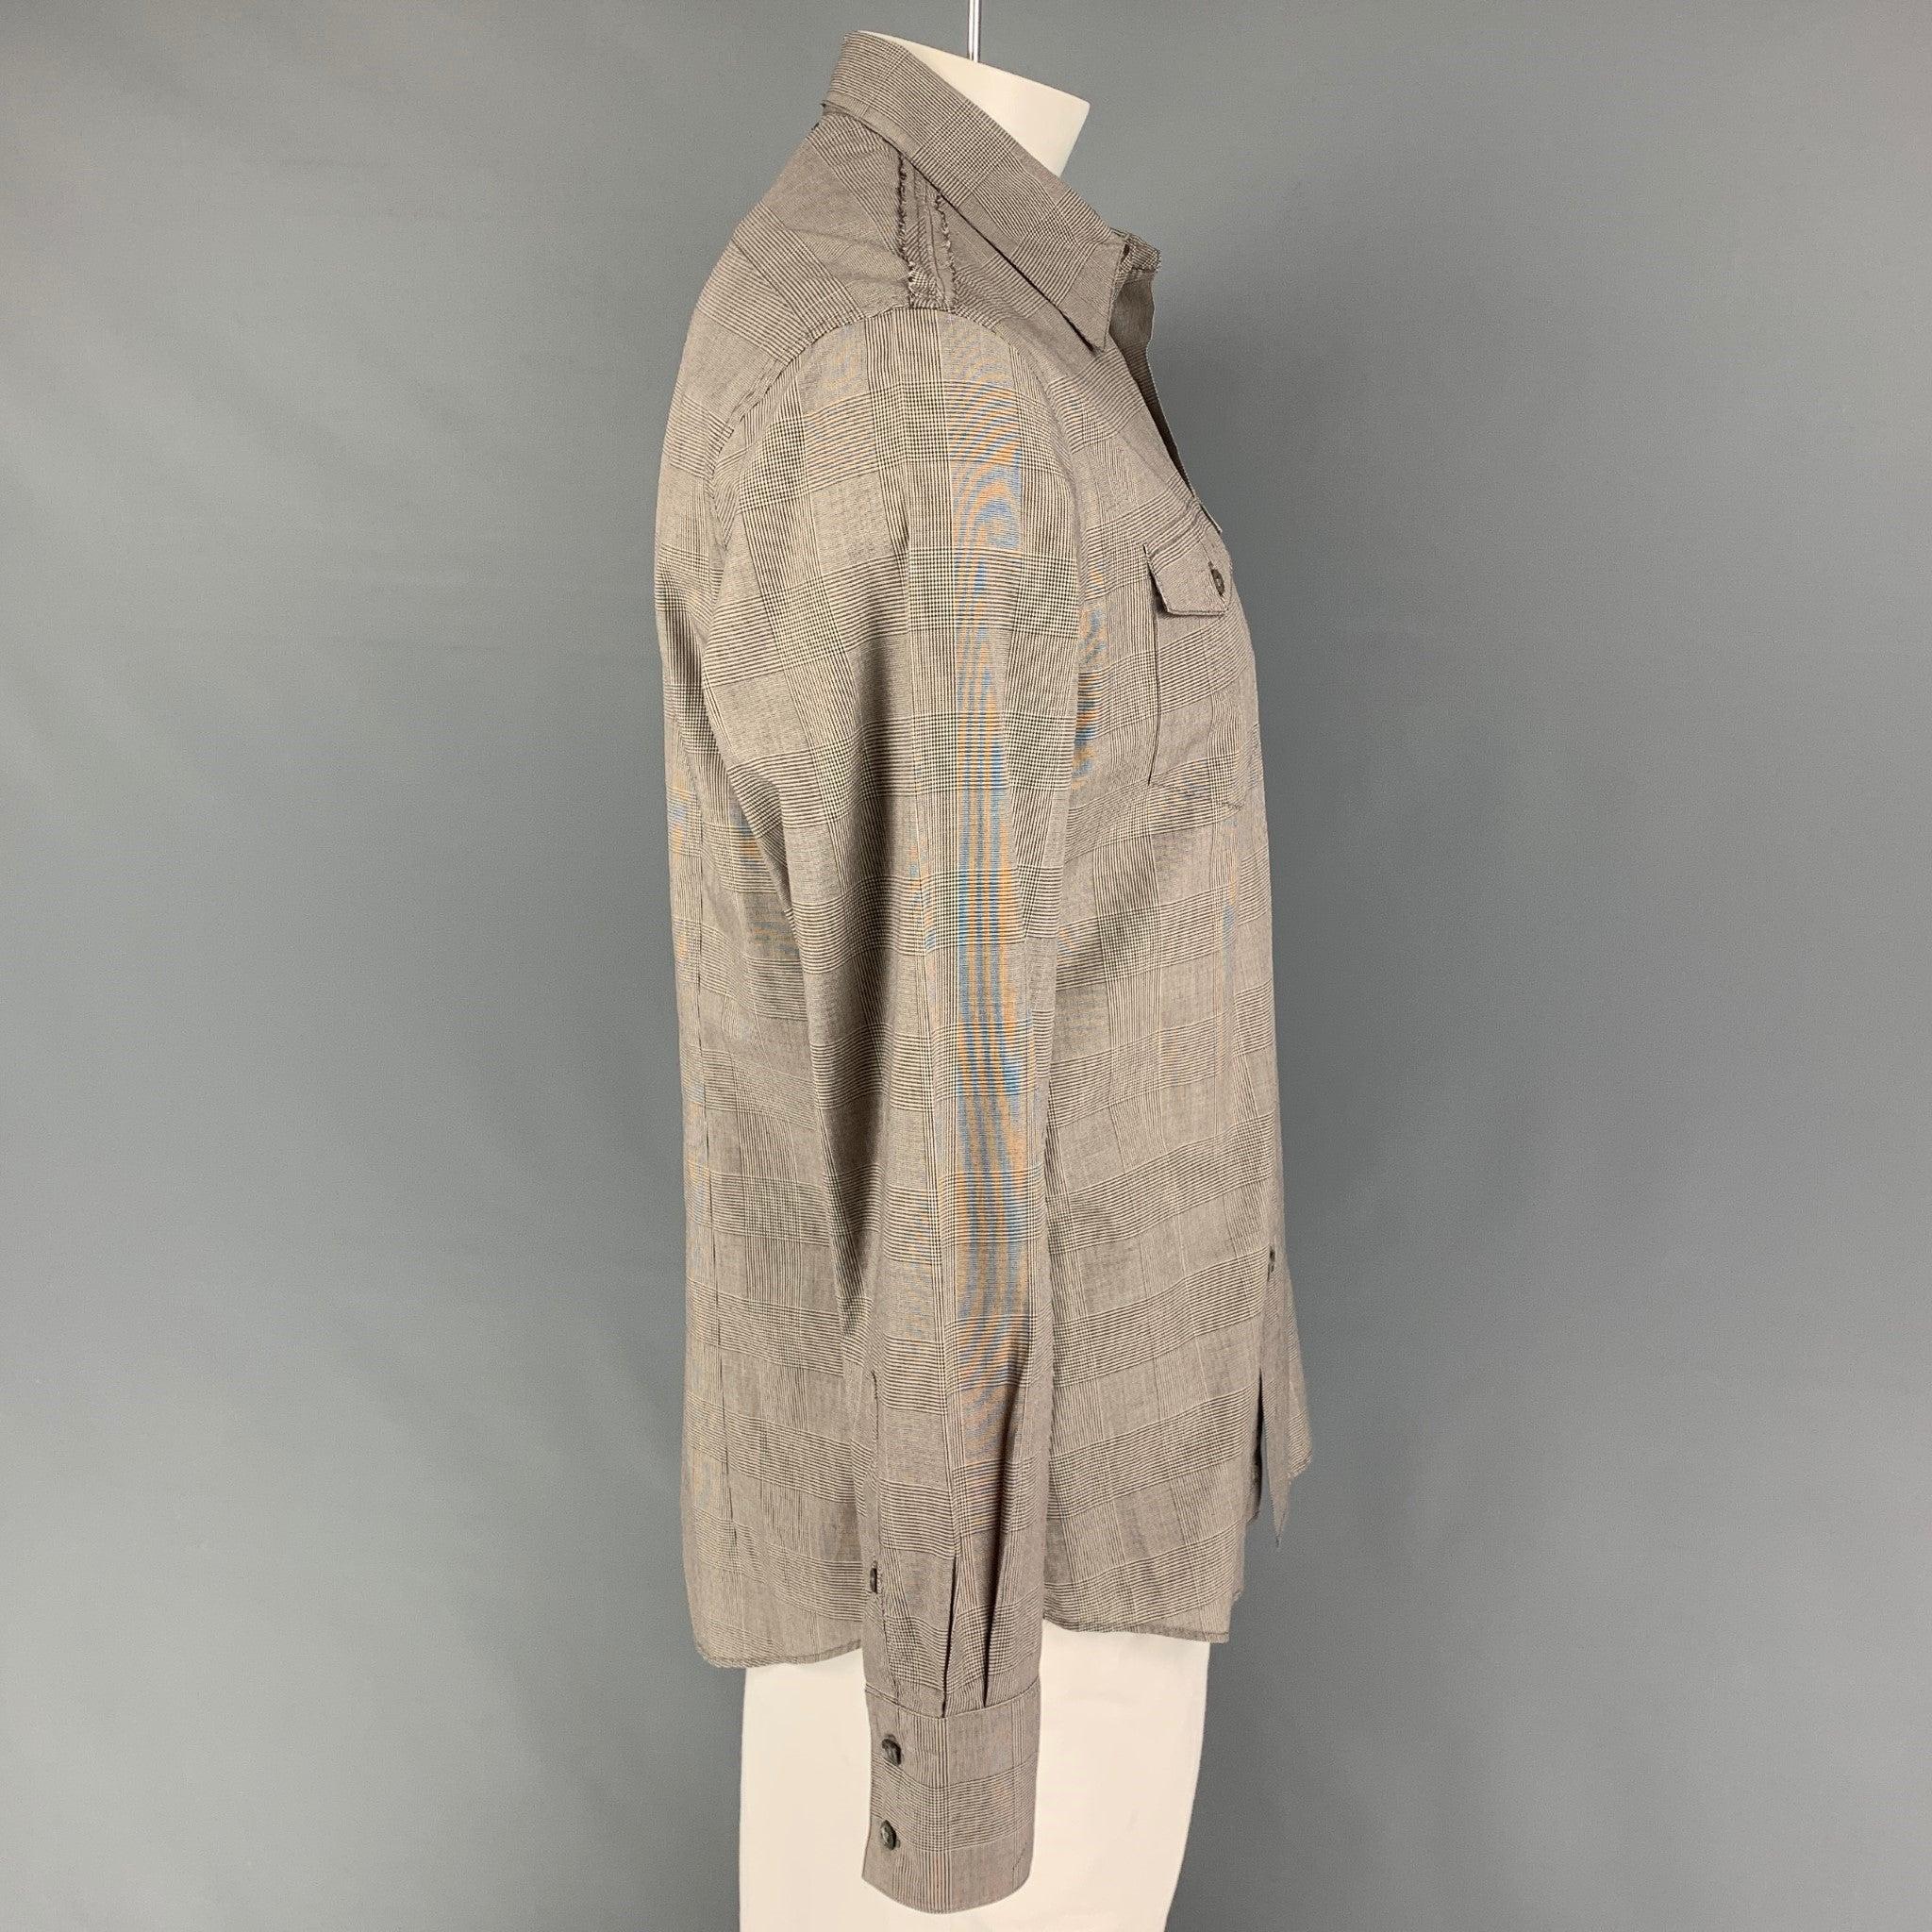 JOHN VARVATOS long sleeve shirt comes in a grey glenplaid cotton featuring a pointed collar, patch pockets, and a button up closure.
Very Good
Pre-Owned Condition. 

Marked:   L  

Measurements: 
 
Shoulder: 19 inches  Chest: 42 inches  Sleeve: 26.5